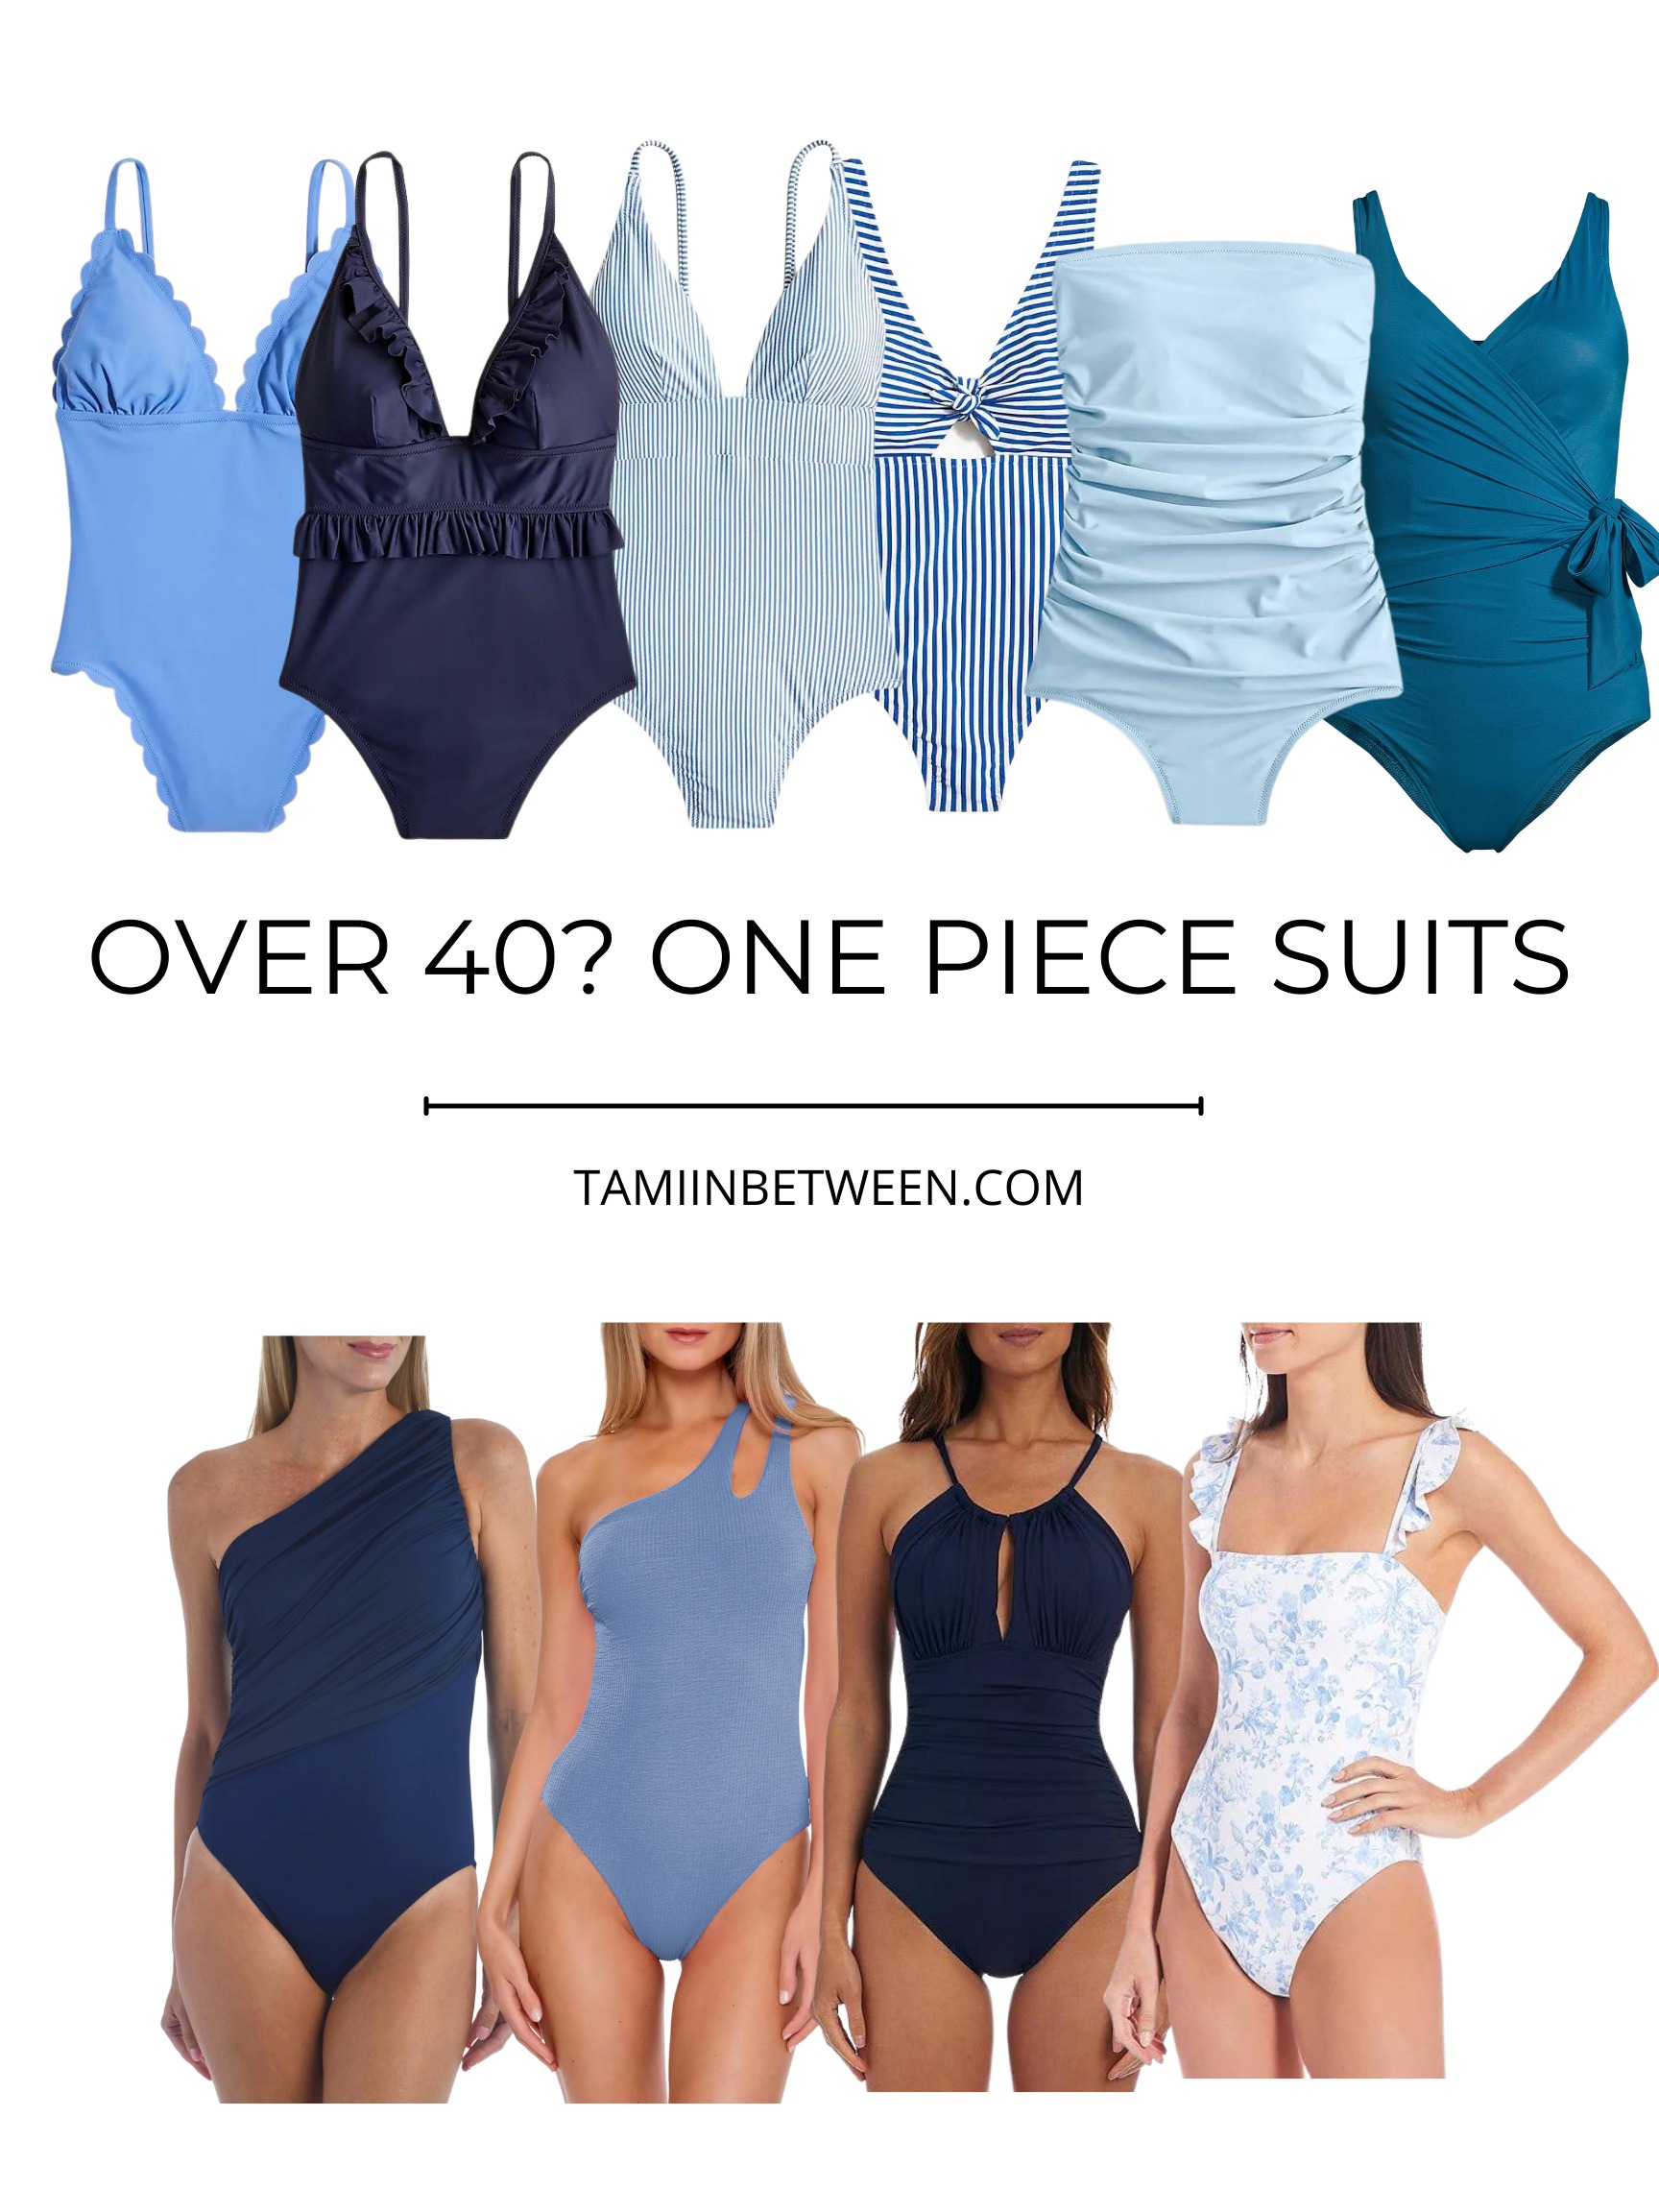 Flat lay of one piece bathing suits